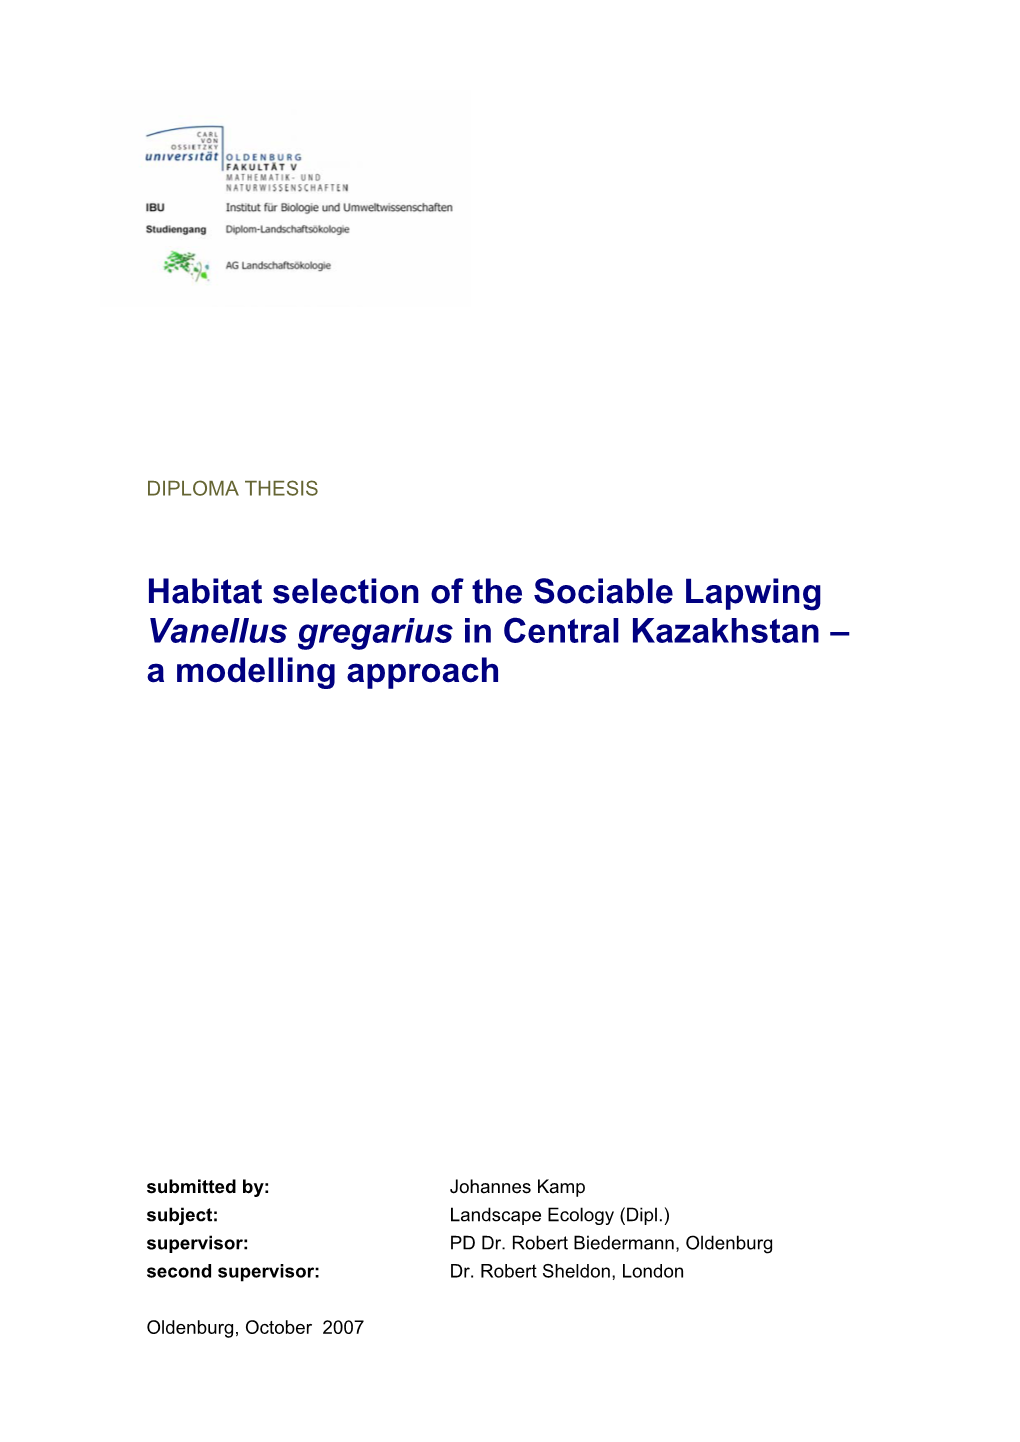 Habitat Selection of the Sociable Lapwing Vanellus Gregarius in Central Kazakhstan – a Modelling Approach